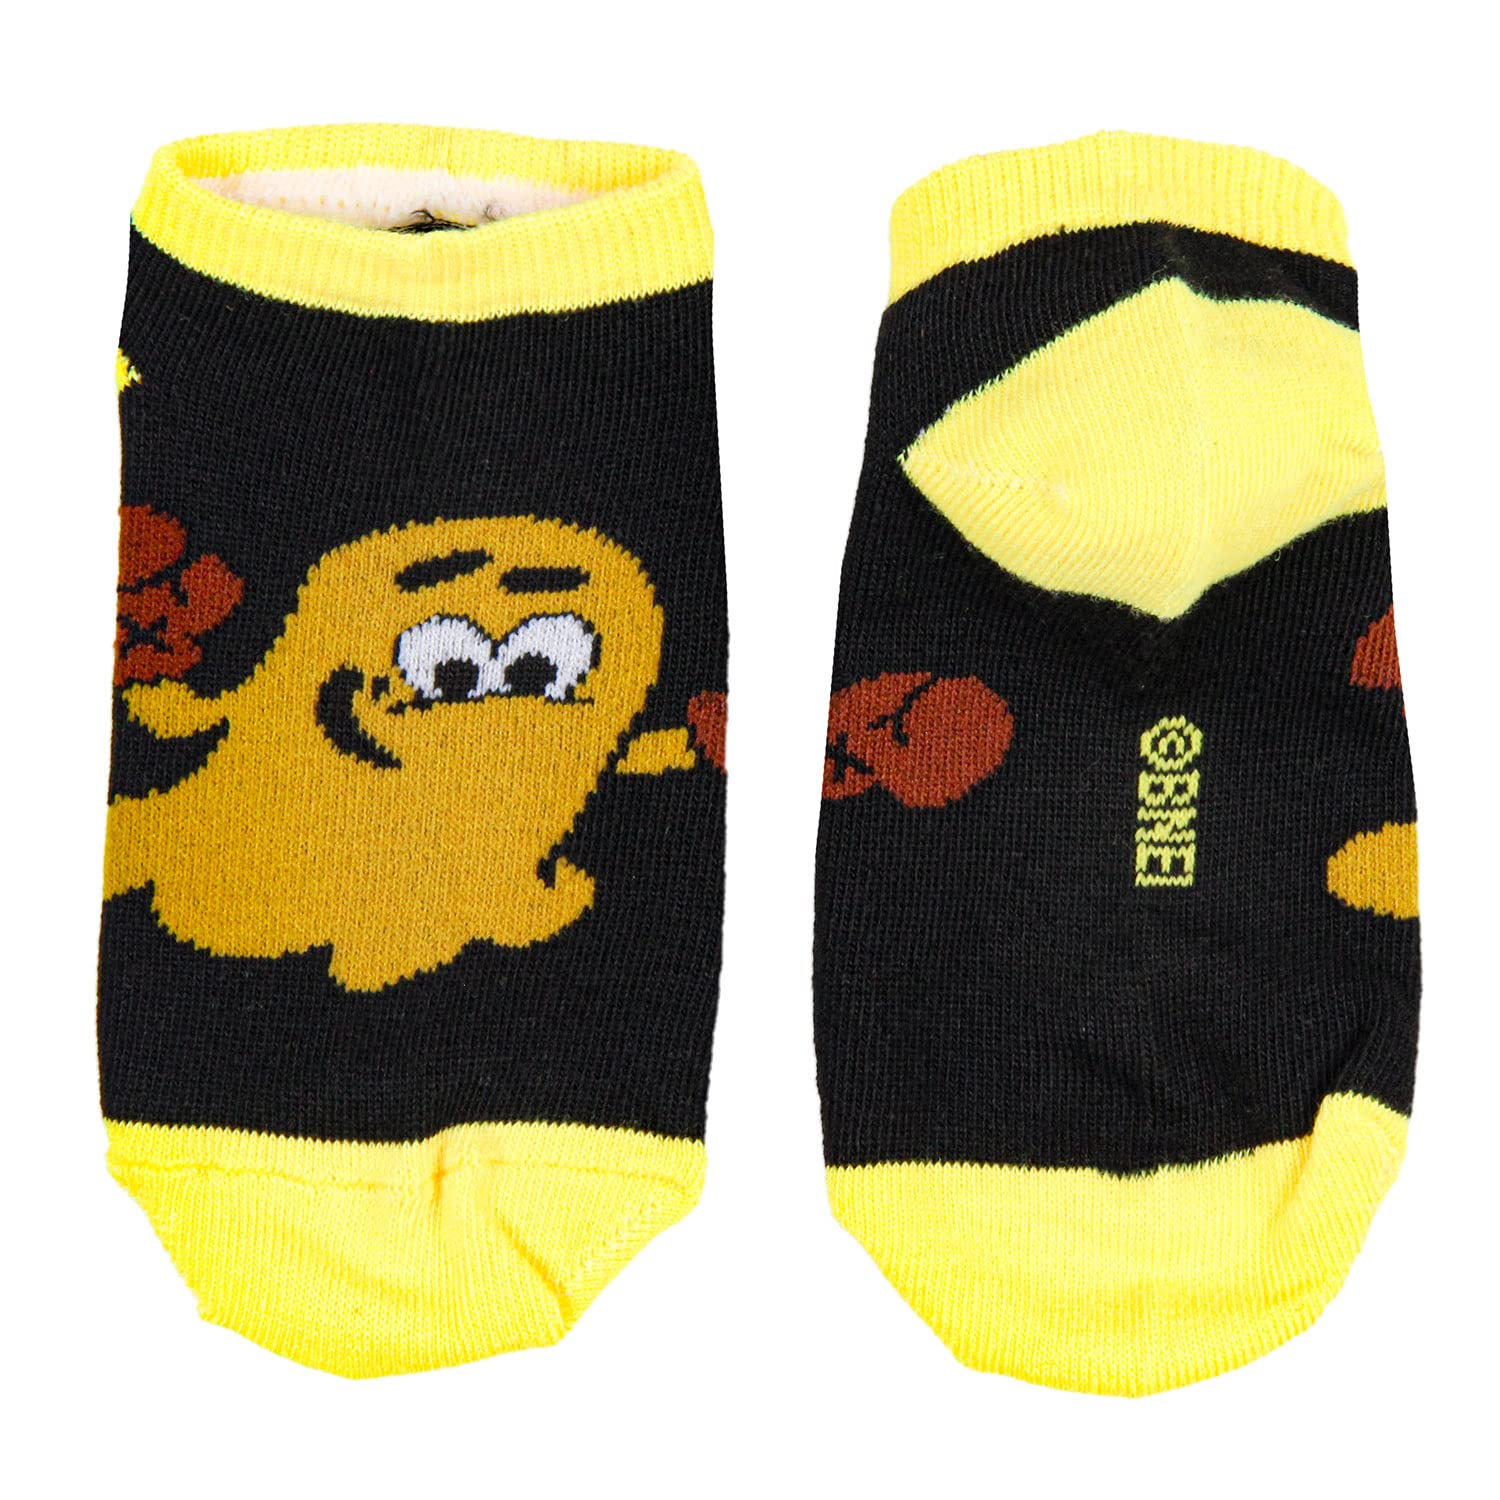 Bioworld Pac-Man Multi-Character Design Kids Ankle No-Show Socks 4 Pairs